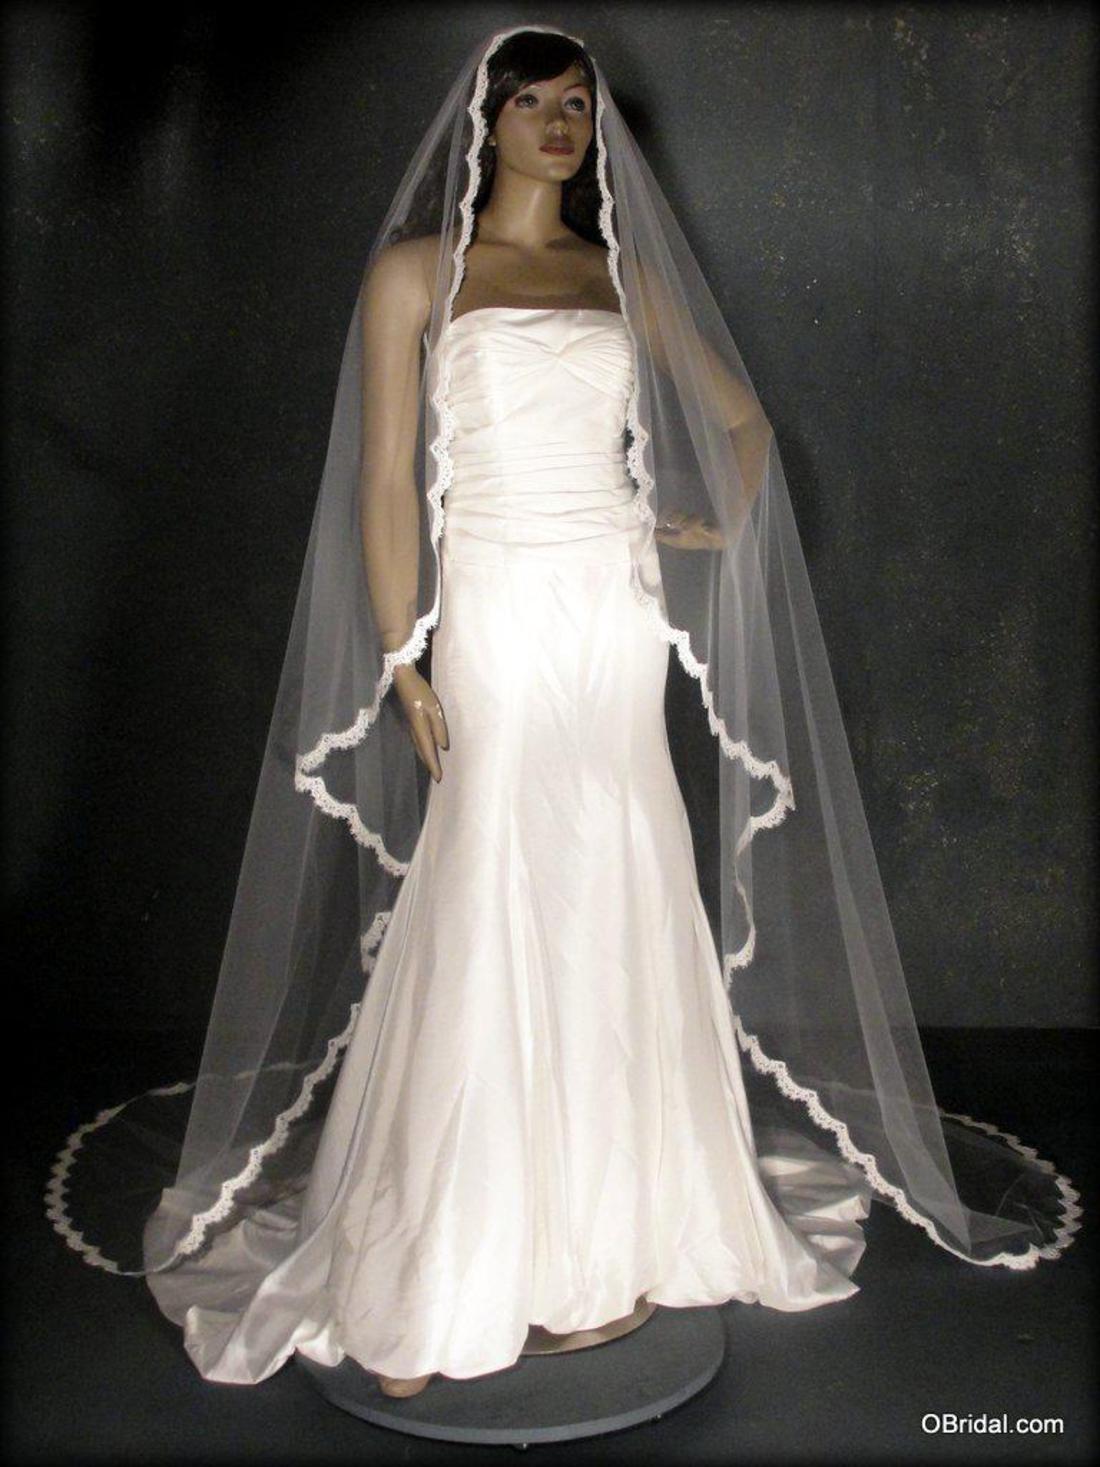 YouLaPan Cathedral Length Thin Scallop Lace Trim Single Tier Edge Wedding Veil Mantilla White / 300cm 118 inch